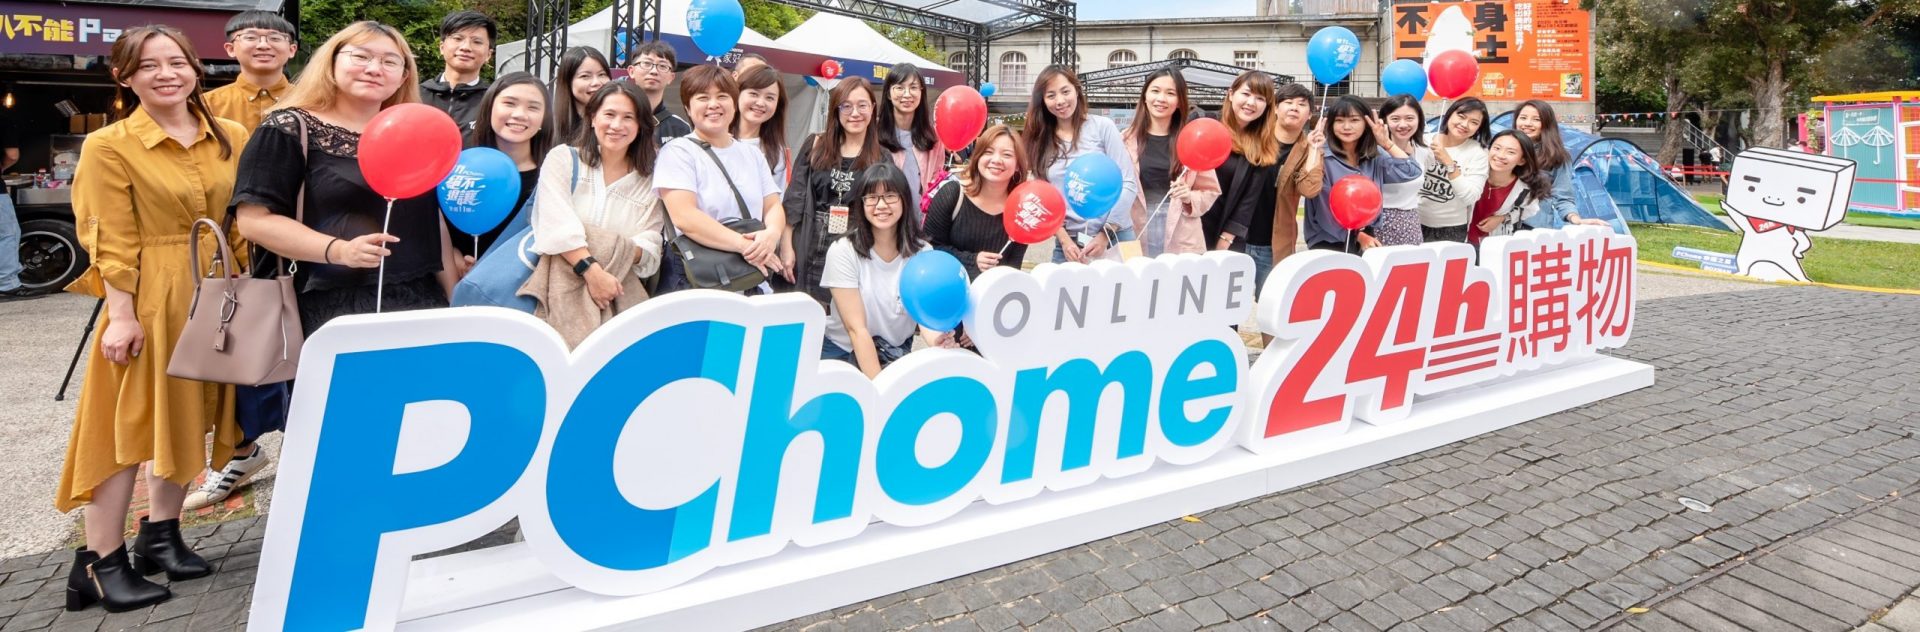 PChome Online